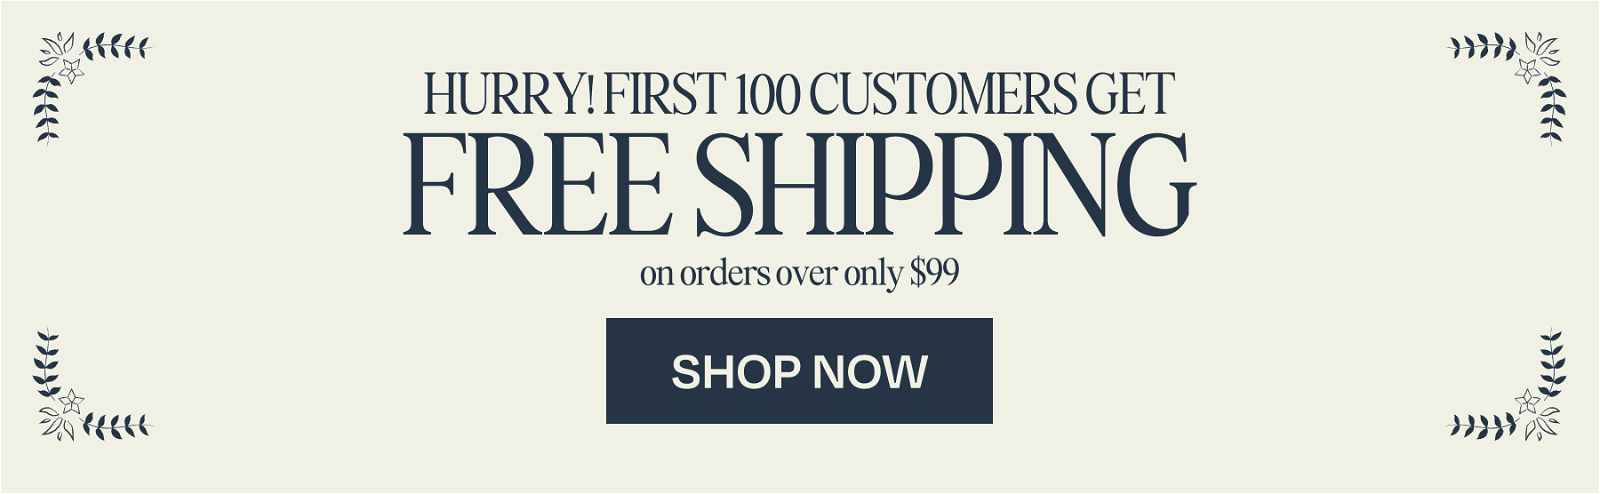 FIRST 100 CUSTOMERS GET FREE SHIPPING ON ORDERS OVER \\$99